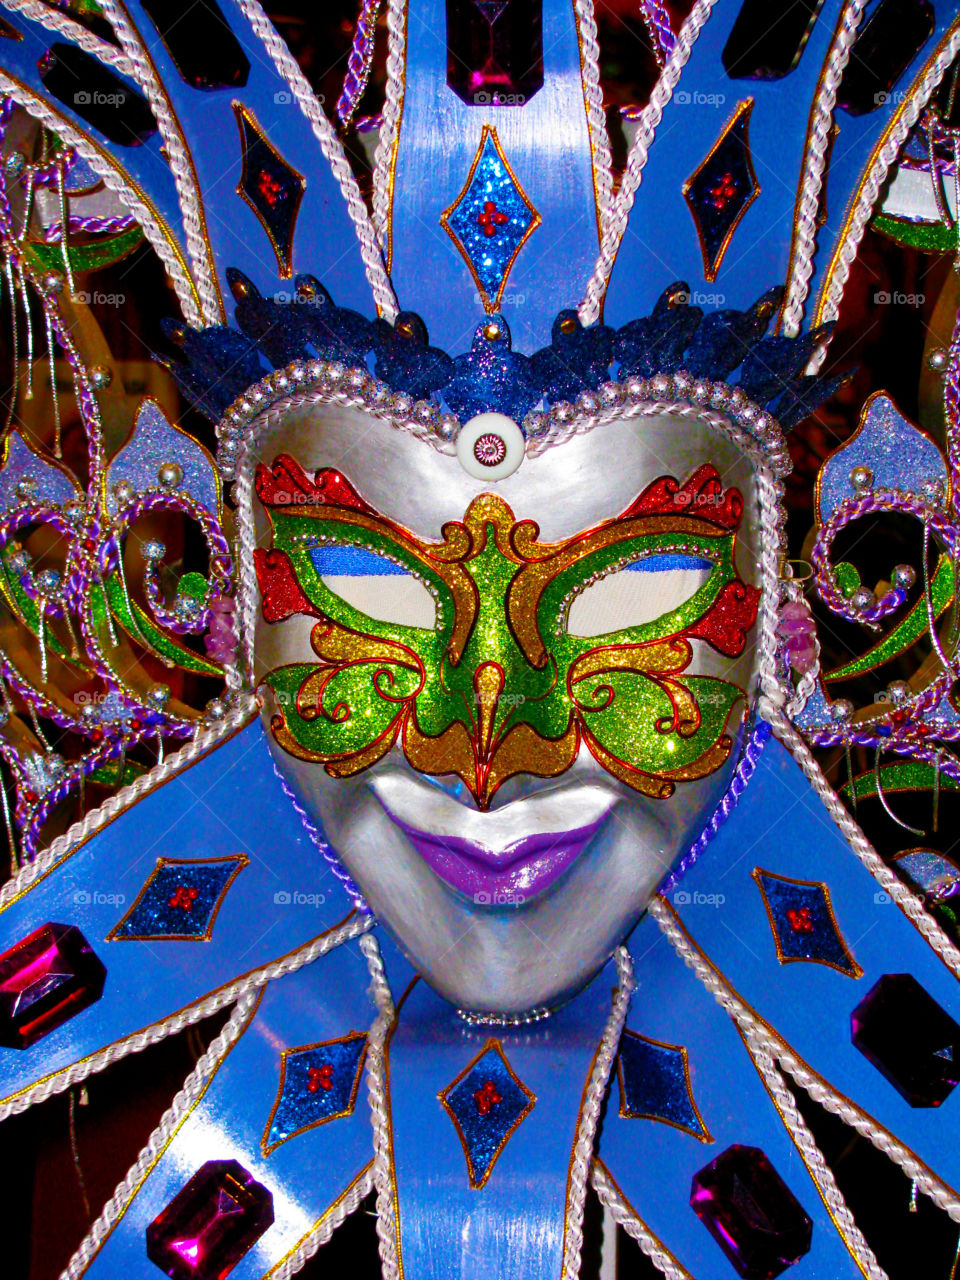 A colorful mask